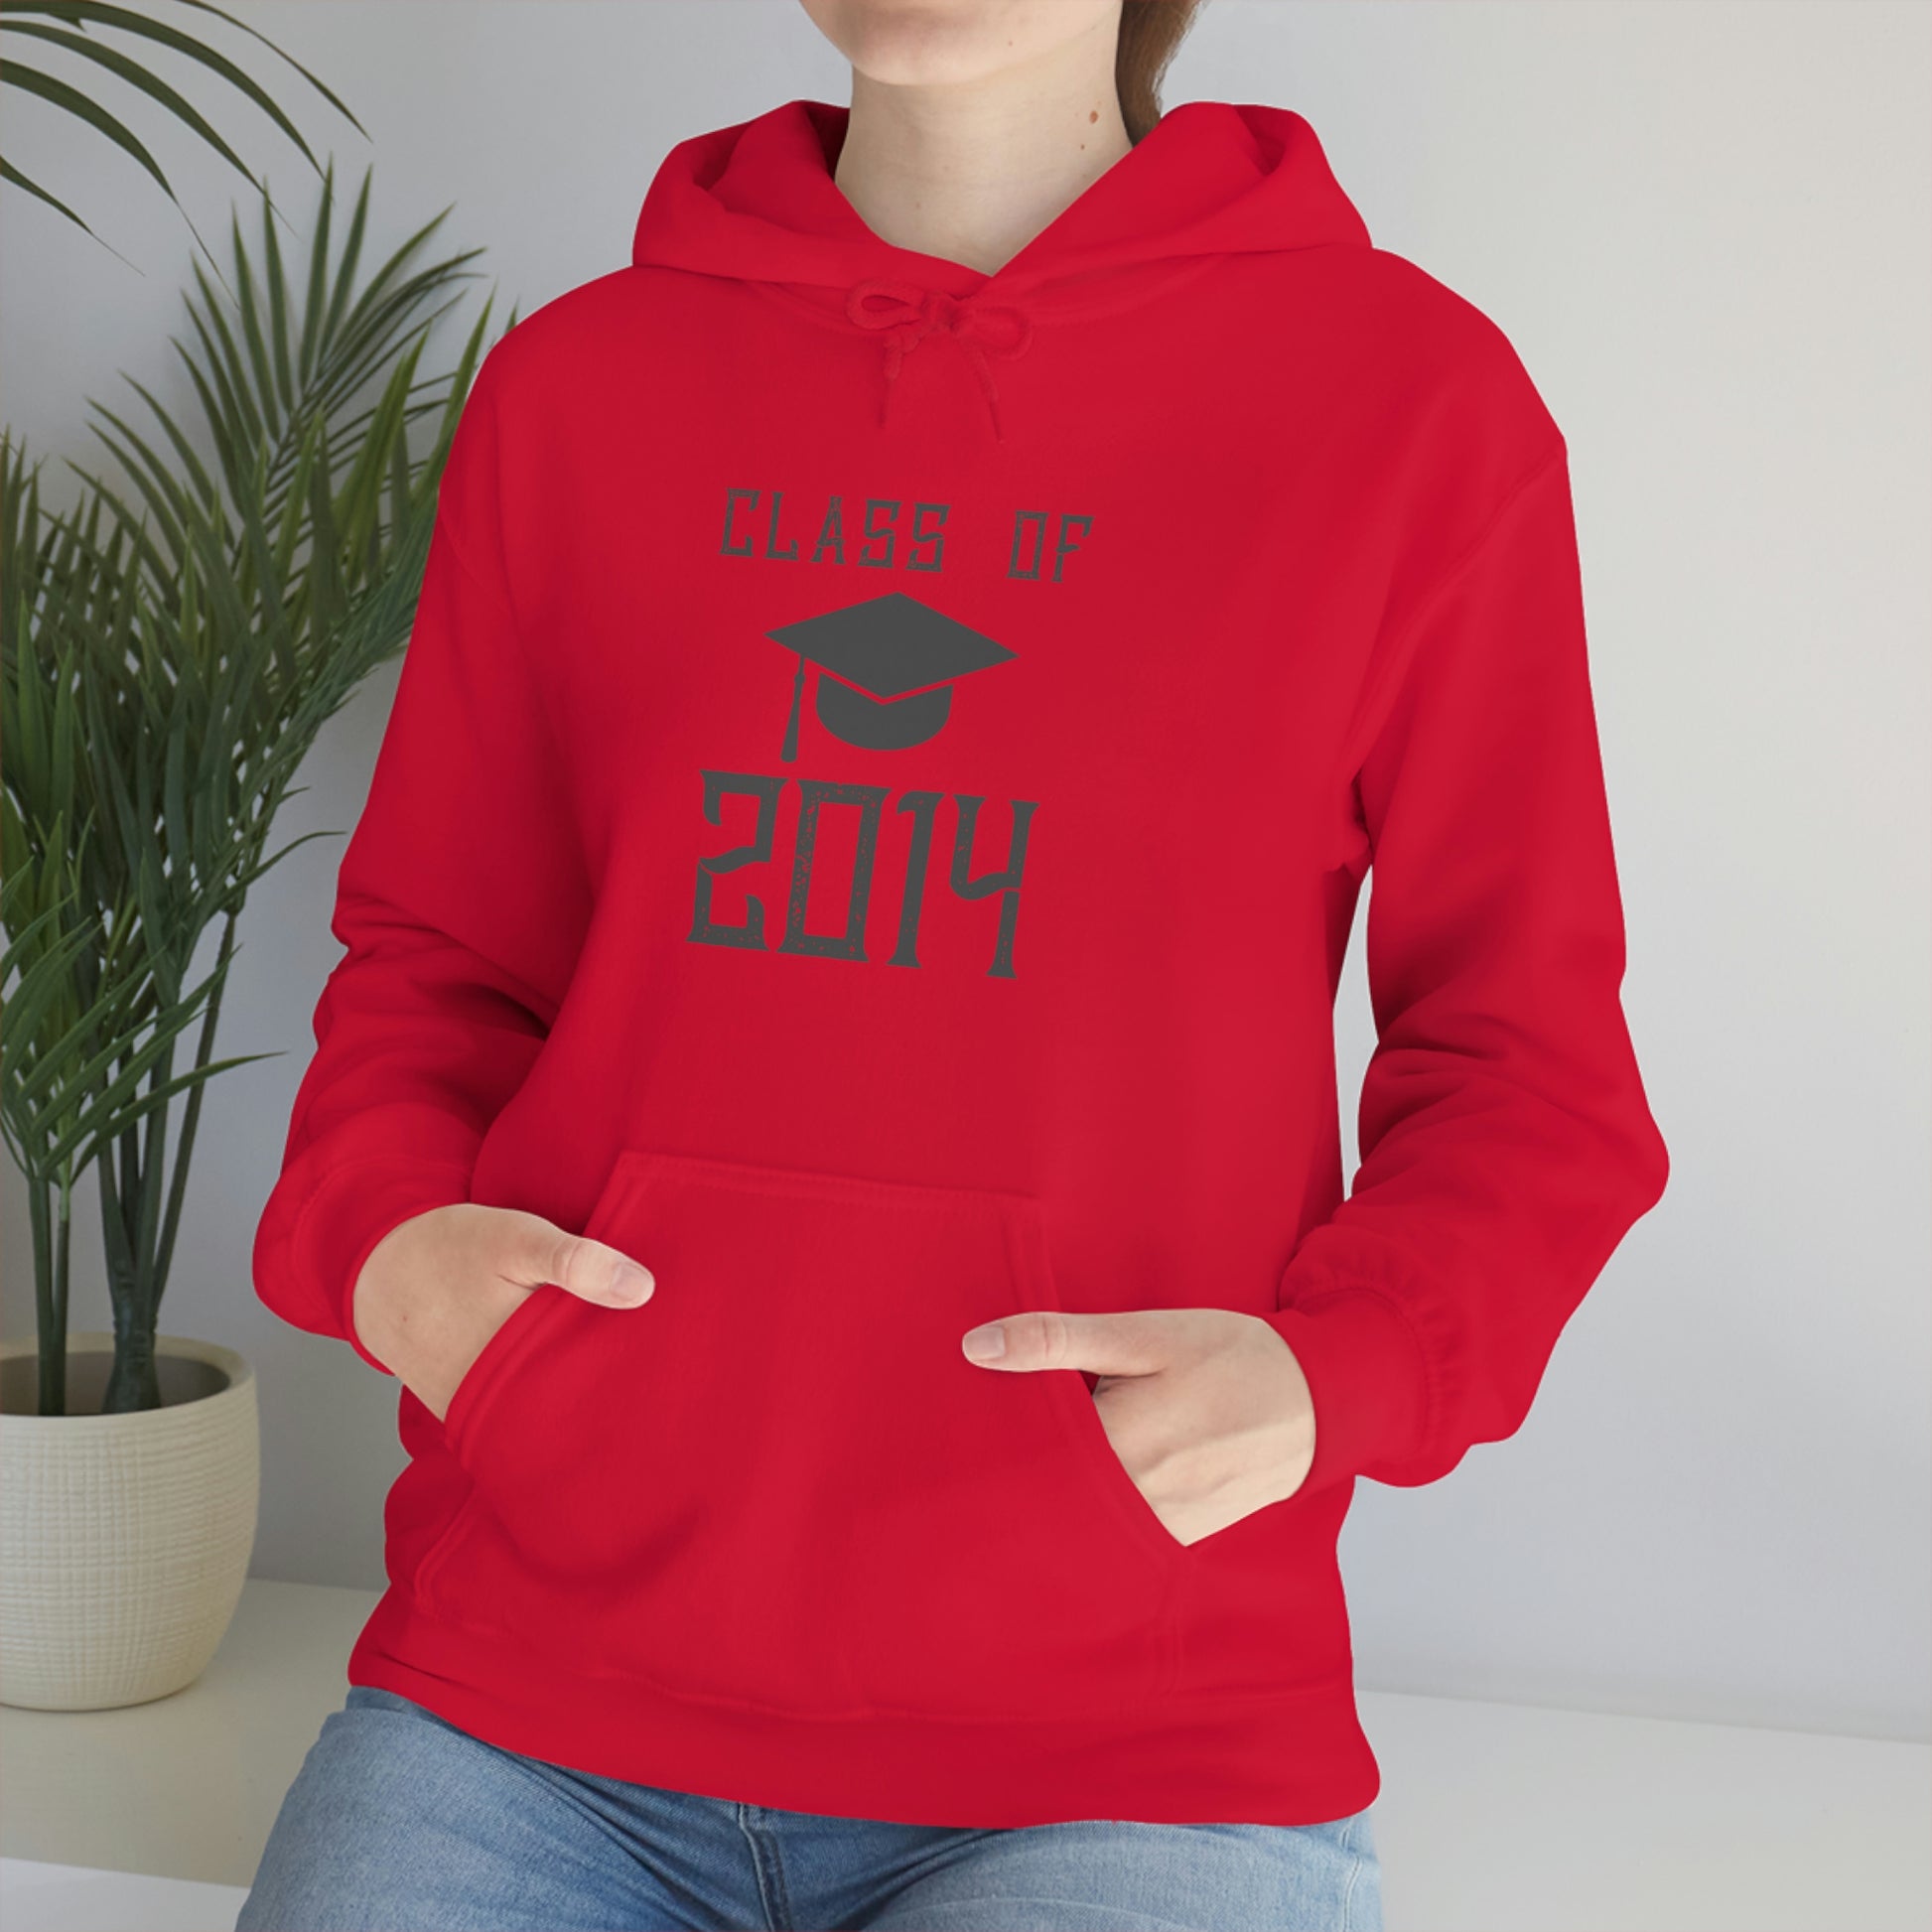 "Class Of 2014" Hoodie - Weave Got Gifts - Unique Gifts You Won’t Find Anywhere Else!